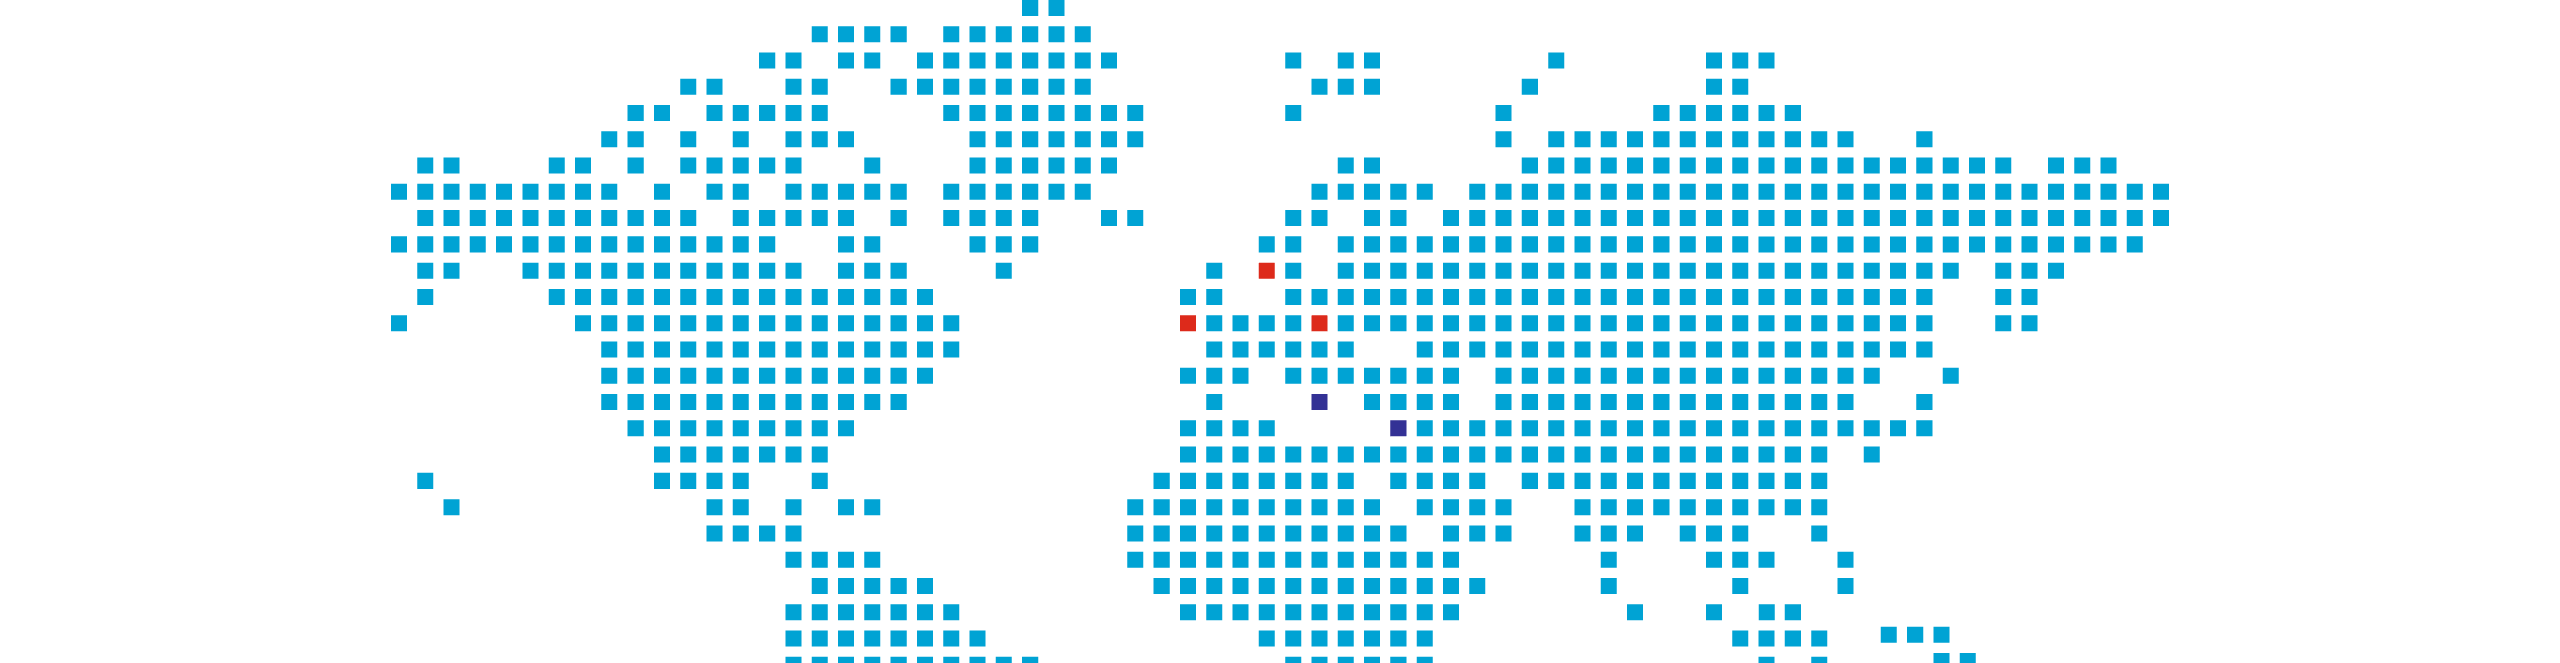 Worldmap Bed-Stay (png)